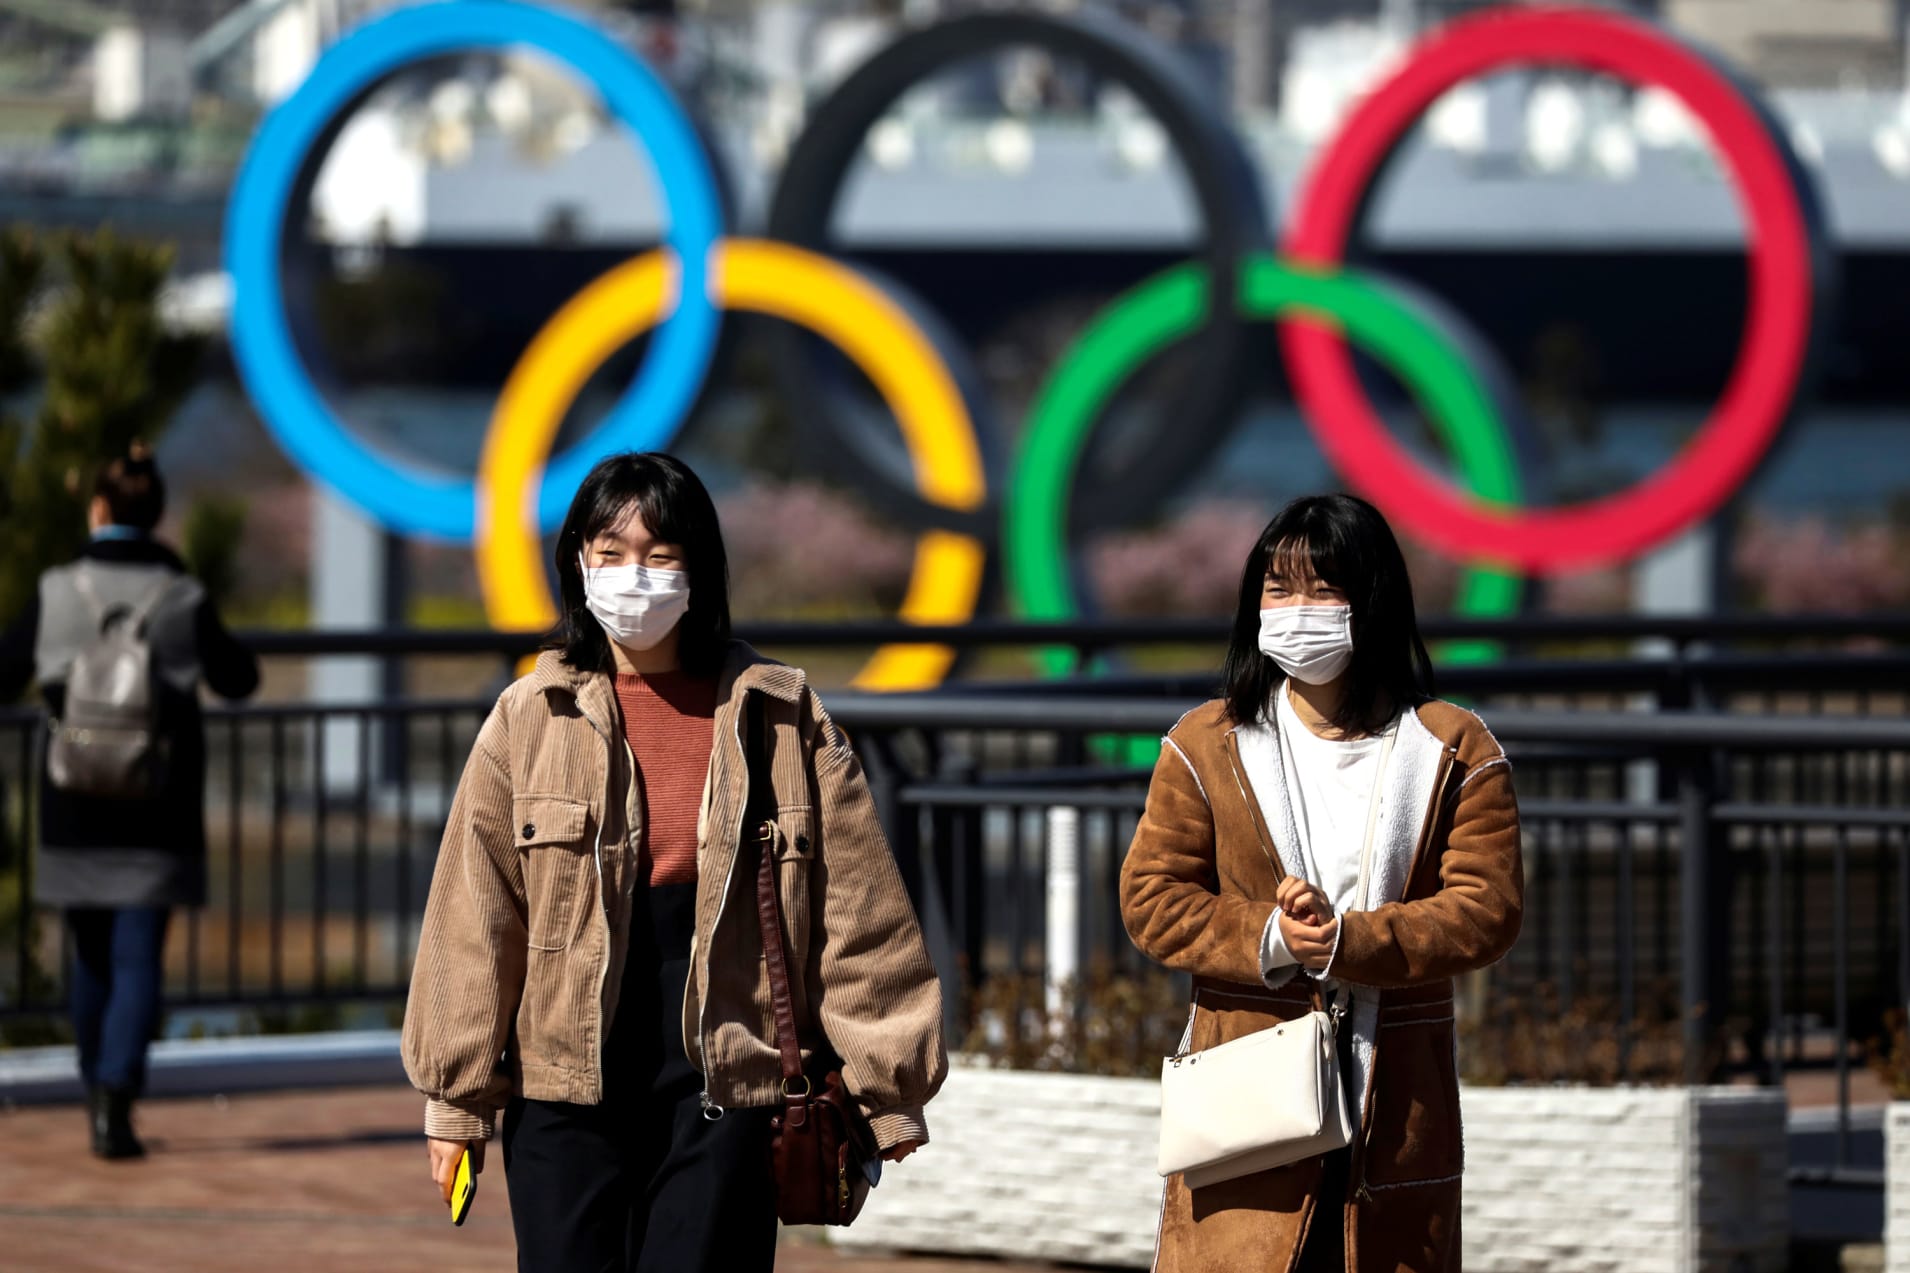 Japanese Researcher: Tokyo 2020 at Risk Without COVID-19 Vaccine